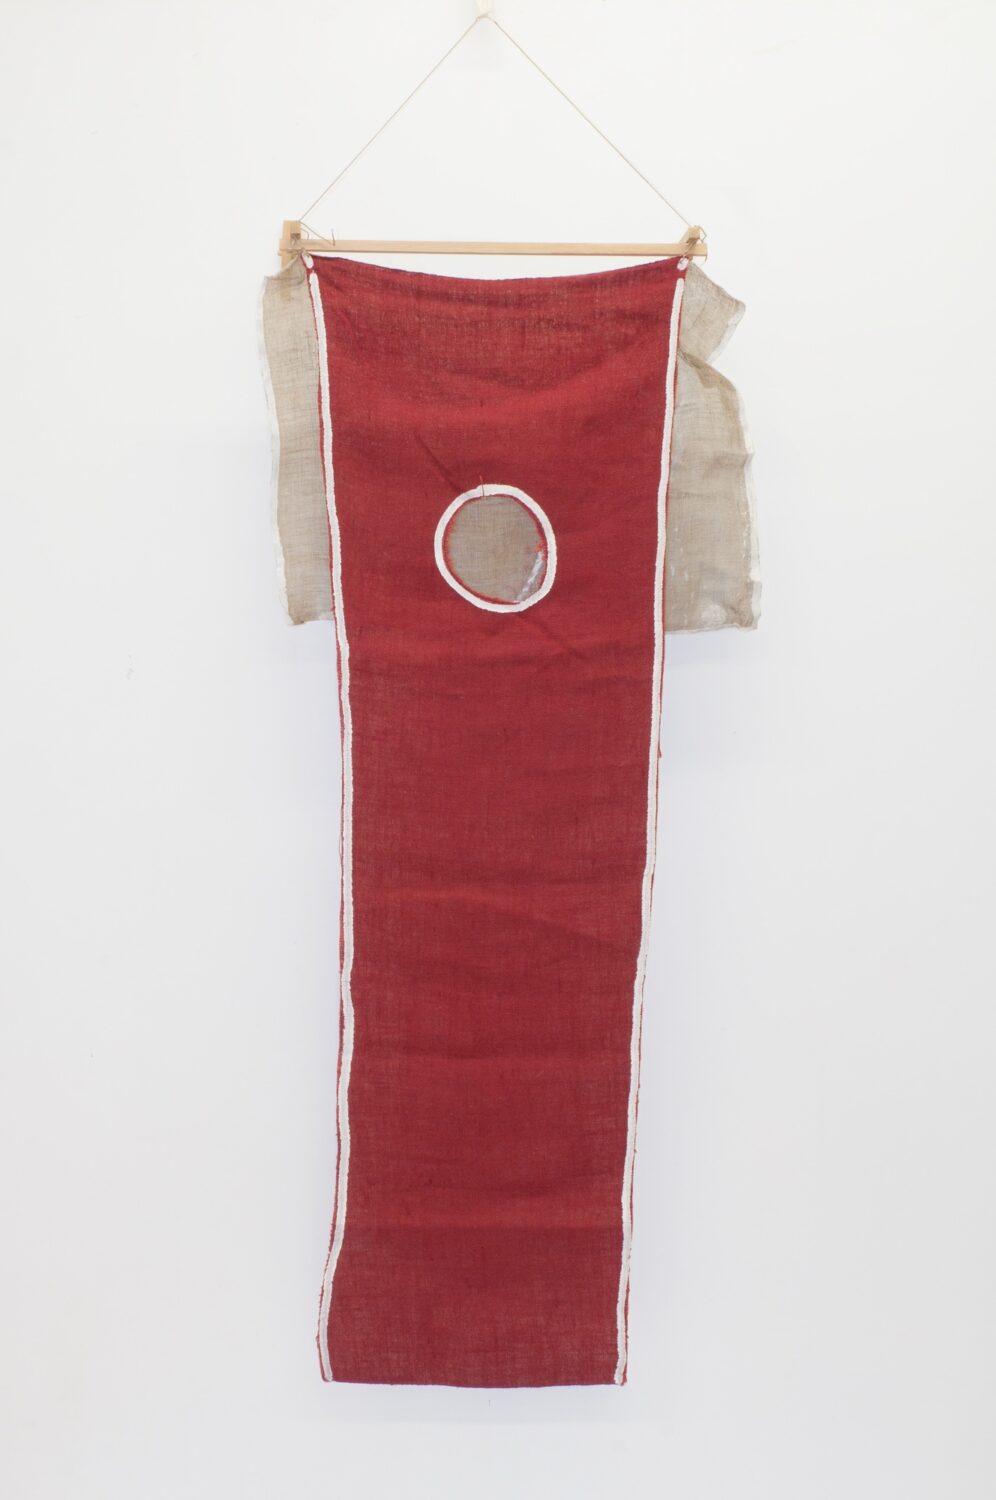 Untitled (red wall hanging)